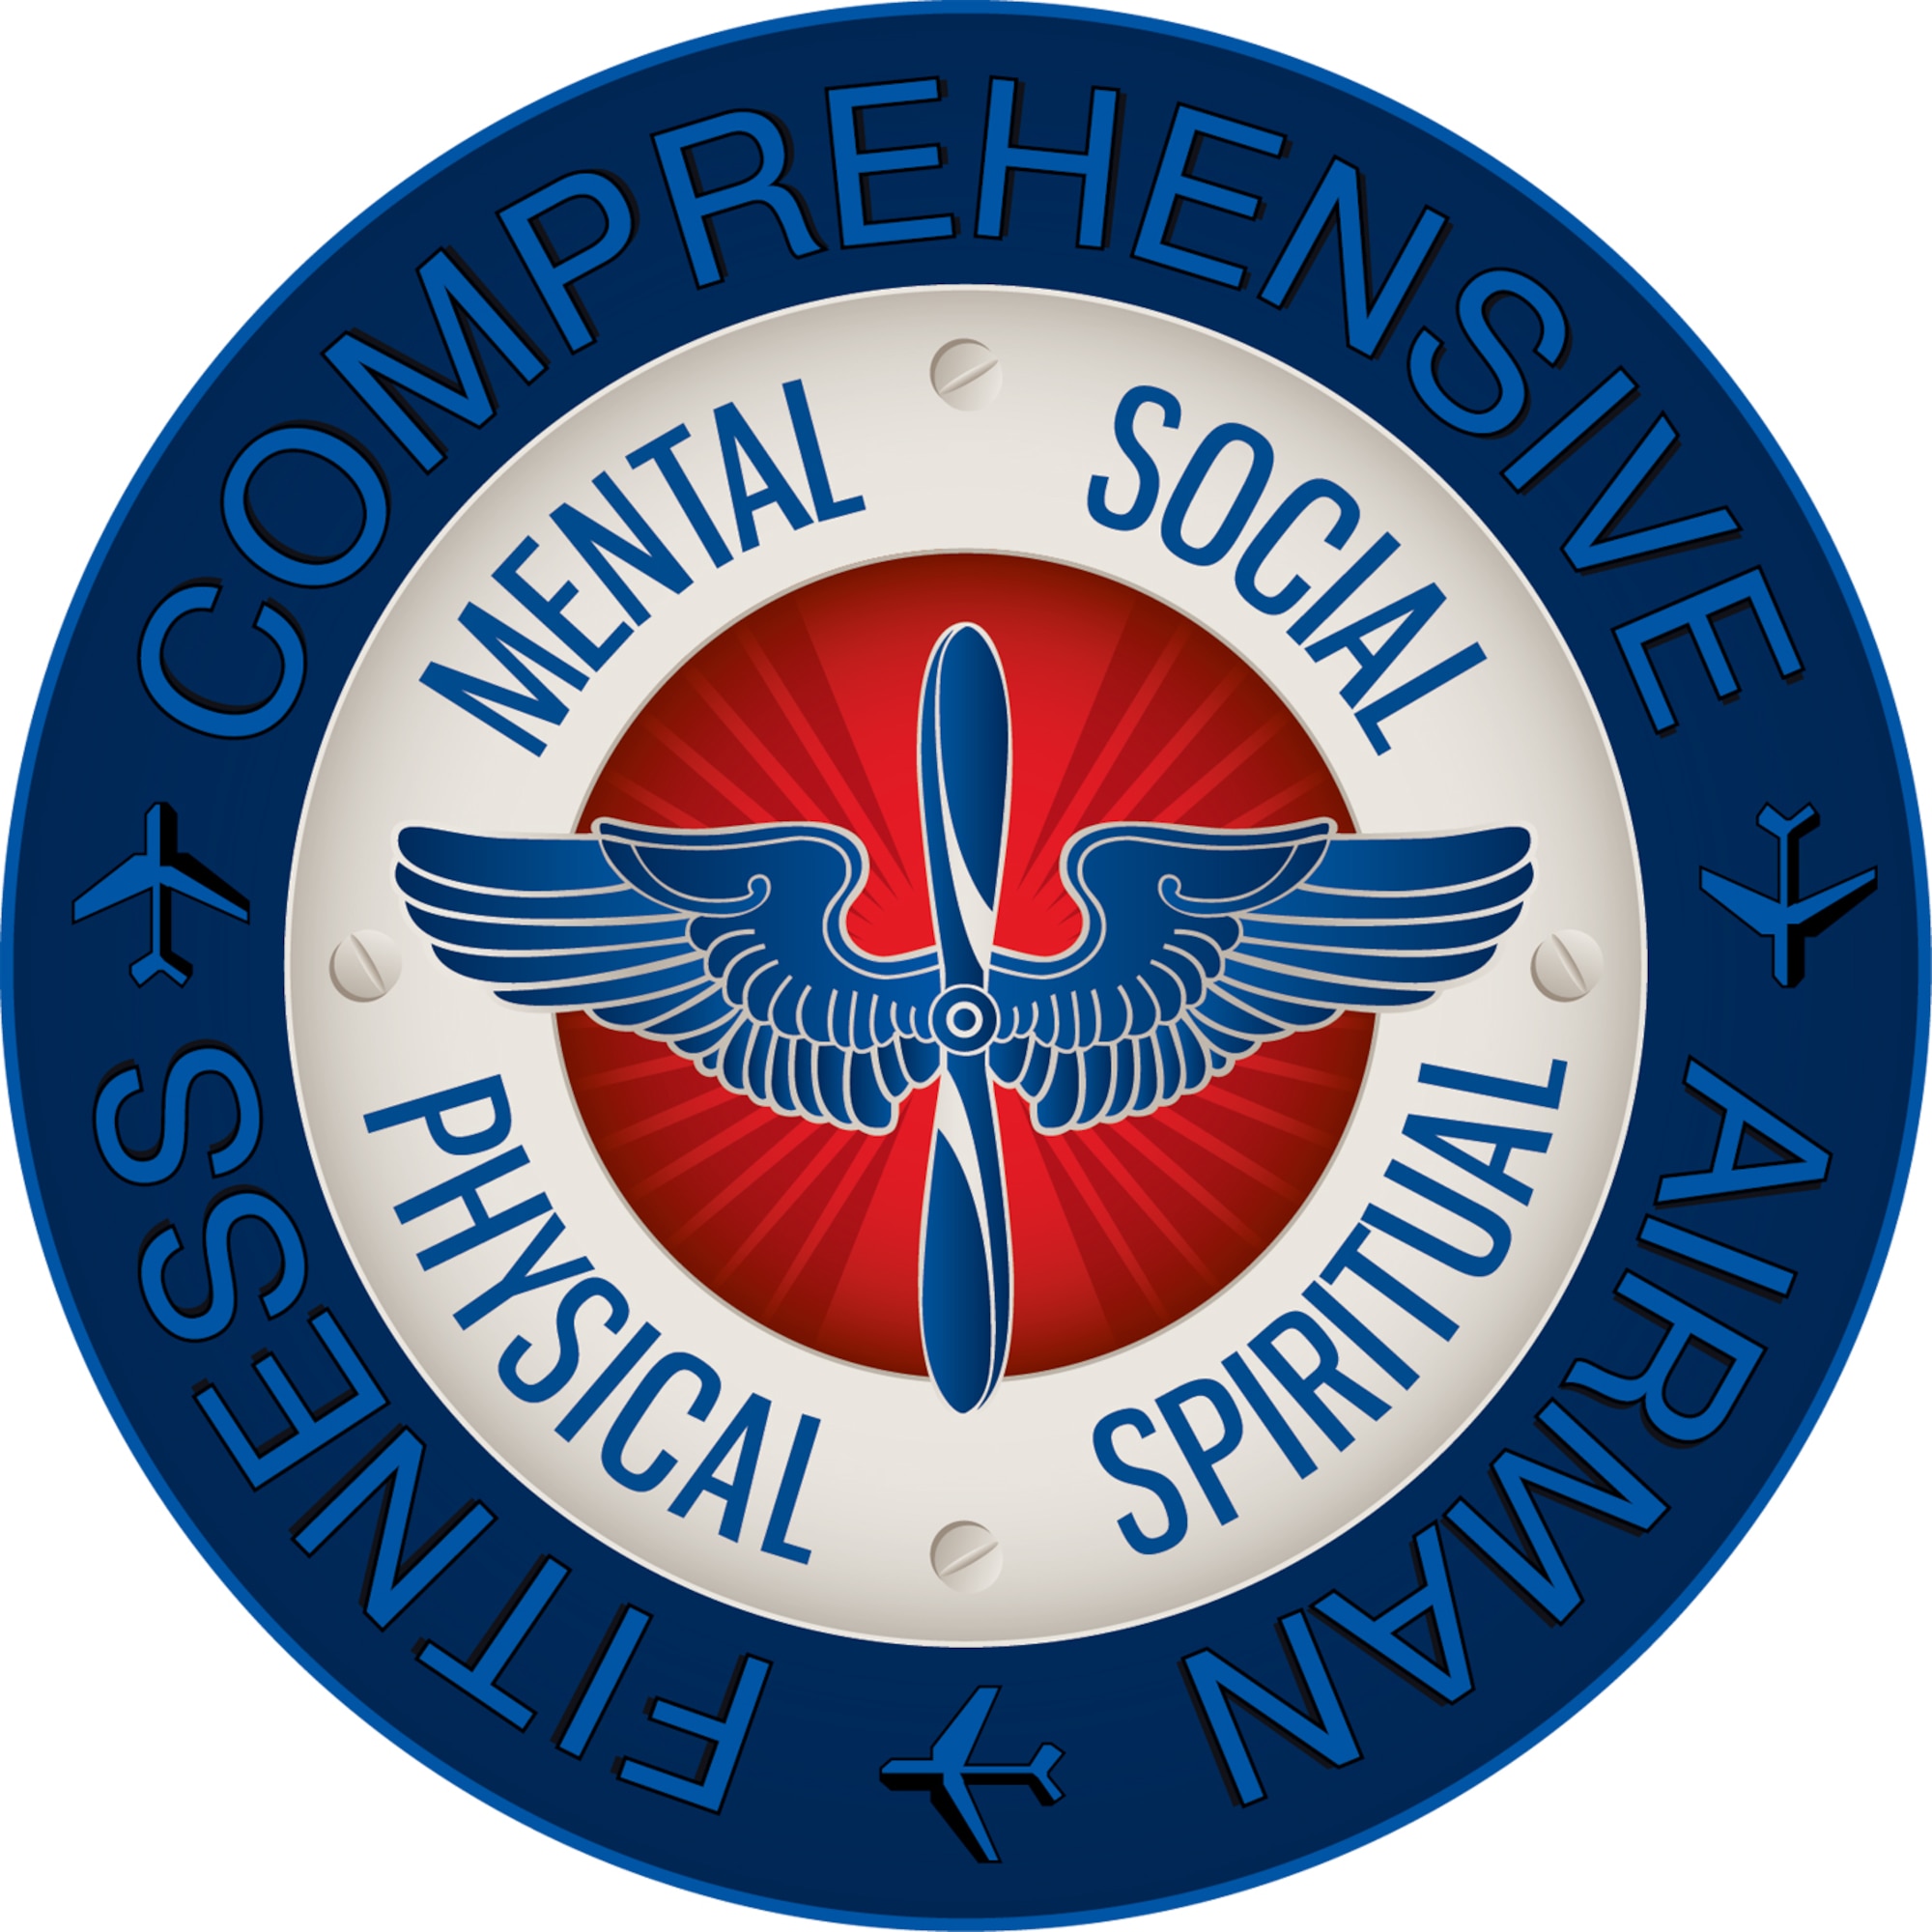 The mission of the Comprehensive Airman Fitness Program is to build and sustain a thriving and resilient Air Force Community that fosters mental, physical, social and spiritual fitness, which are the areas of a person’s life and capture the totality of how they experience and relate to others and themselves. These areas are also referred to as the four pillars. (U.S. Air Force graphic)